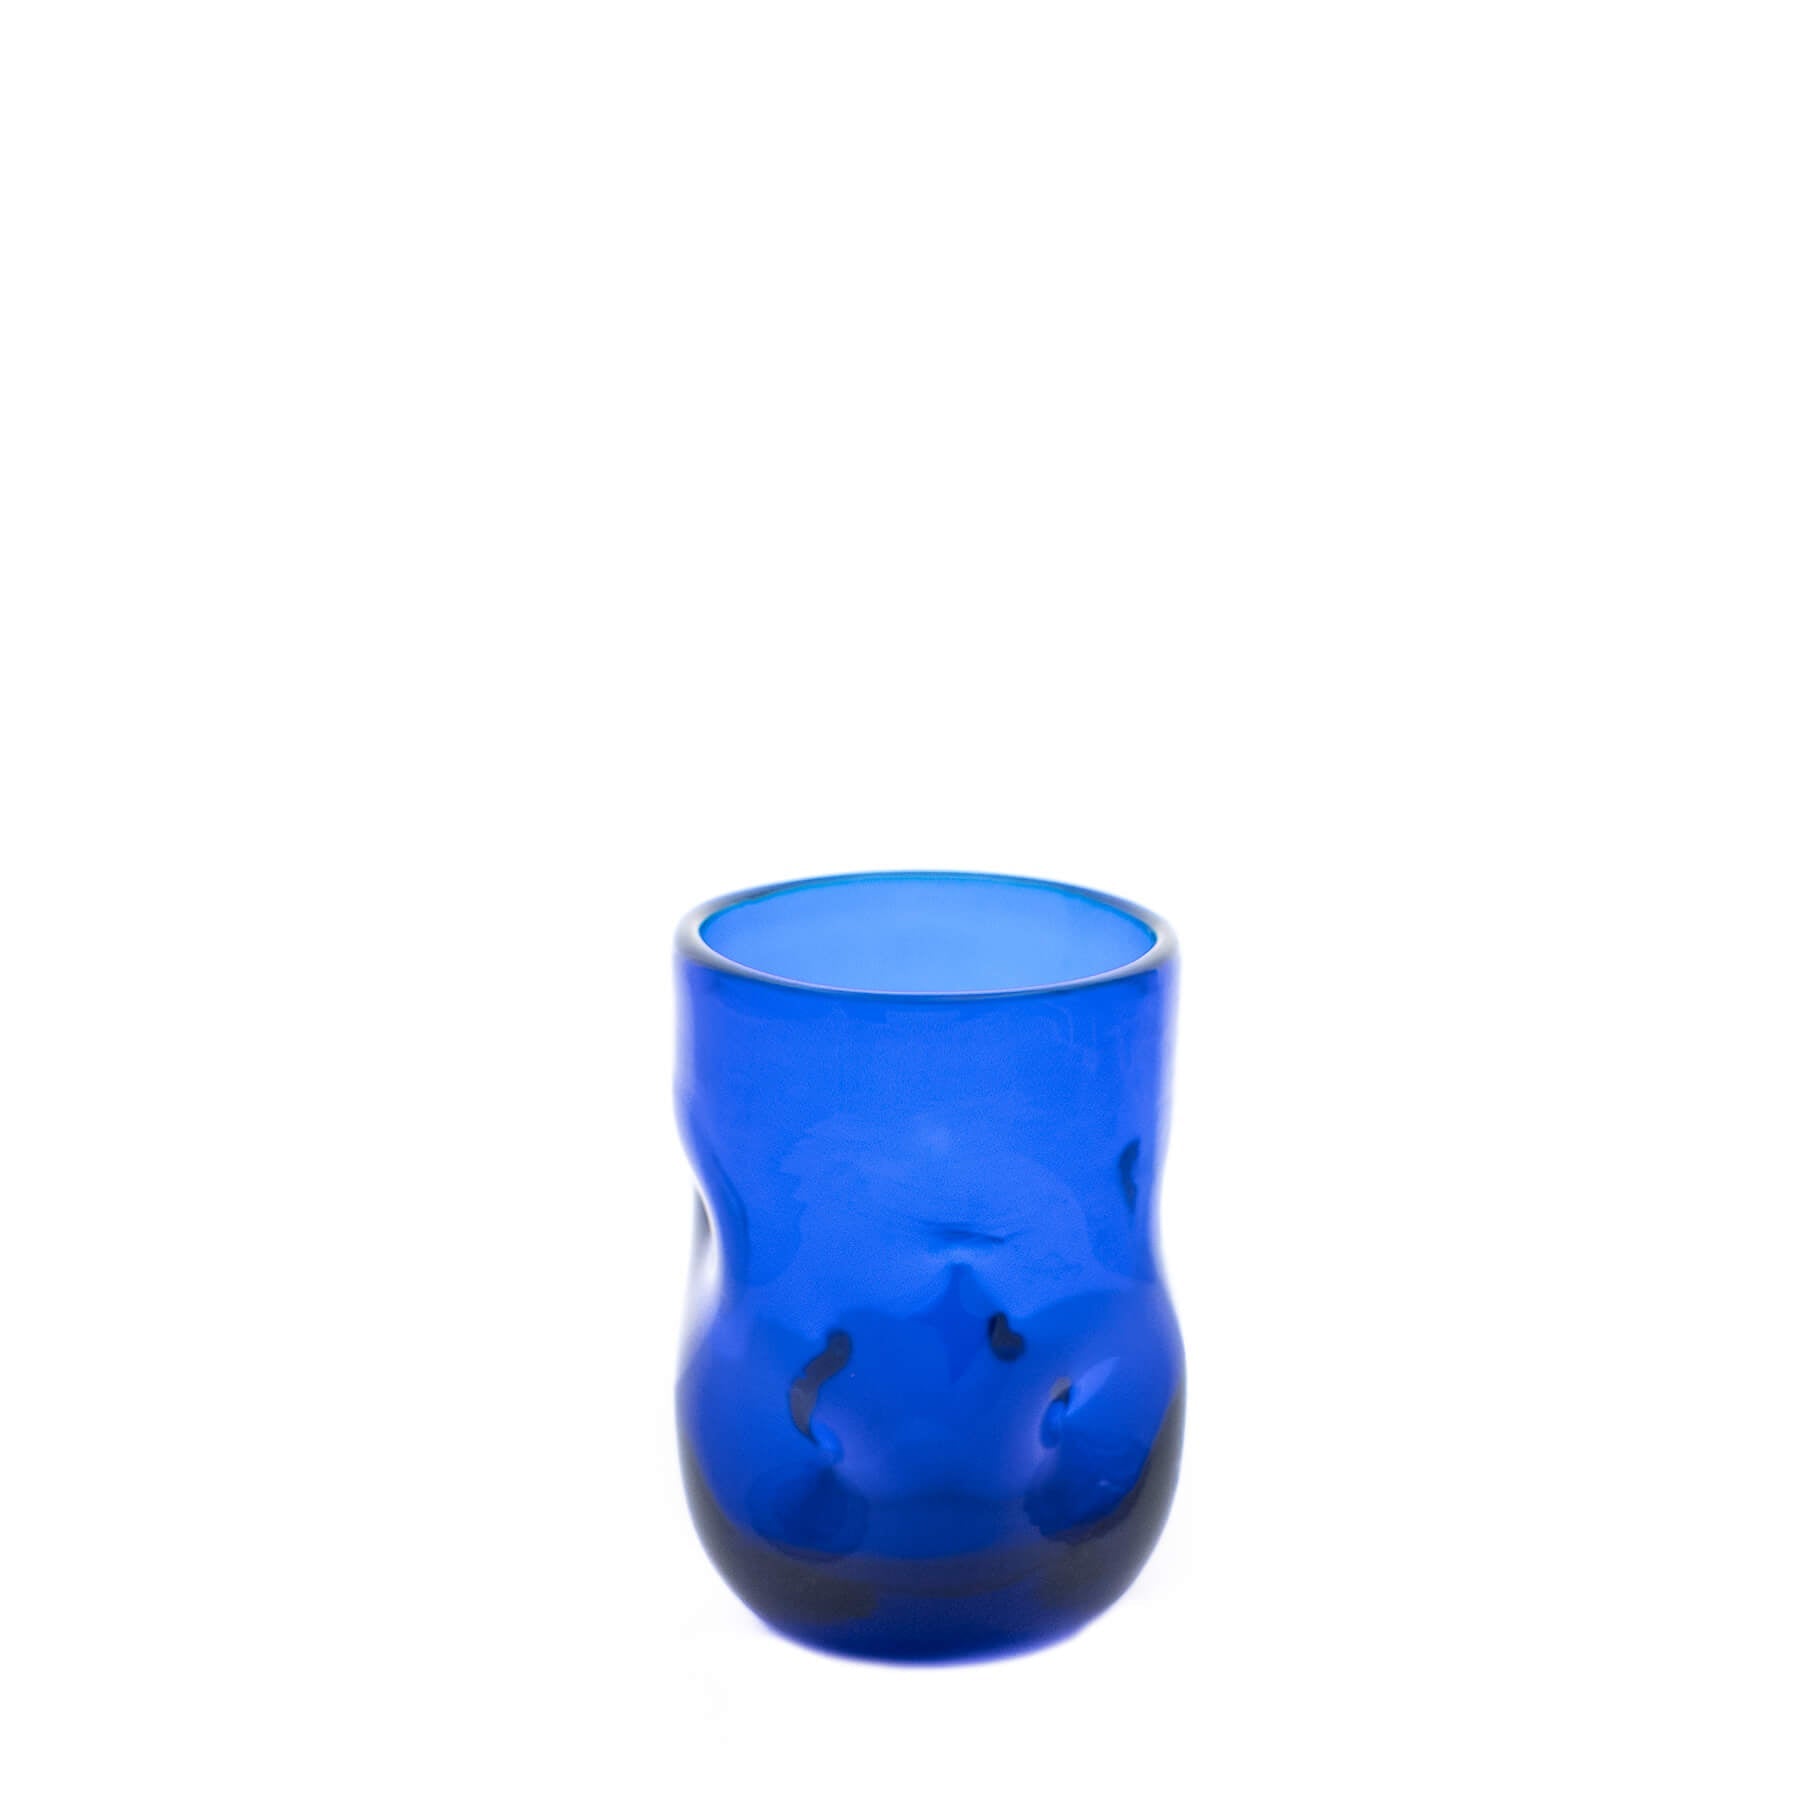 Product photo for Blenko 418S Small Dimple Glass - Cobalt